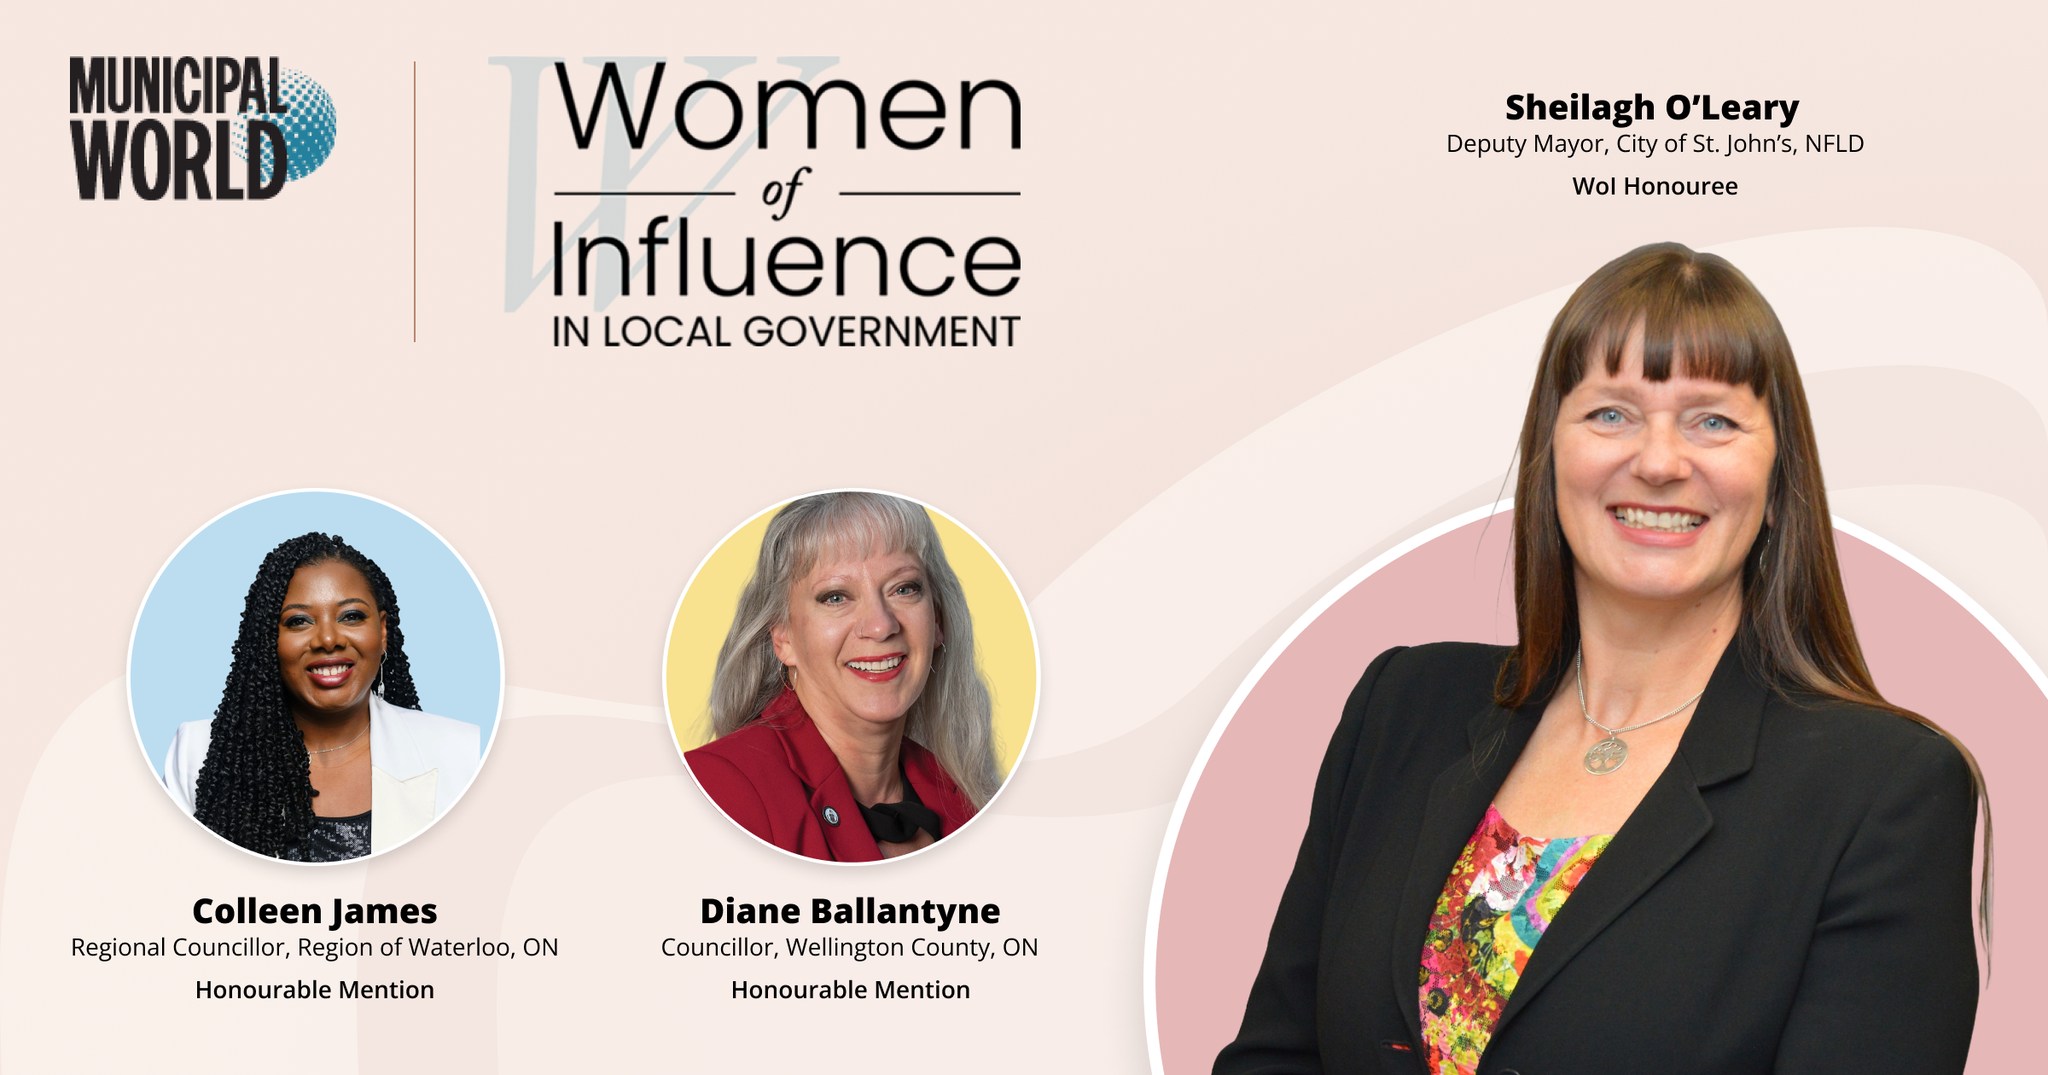 Image of Sheilagh O'Leary honouring her as the recipient of the Women of Influence in Local Government Award from Municipal World